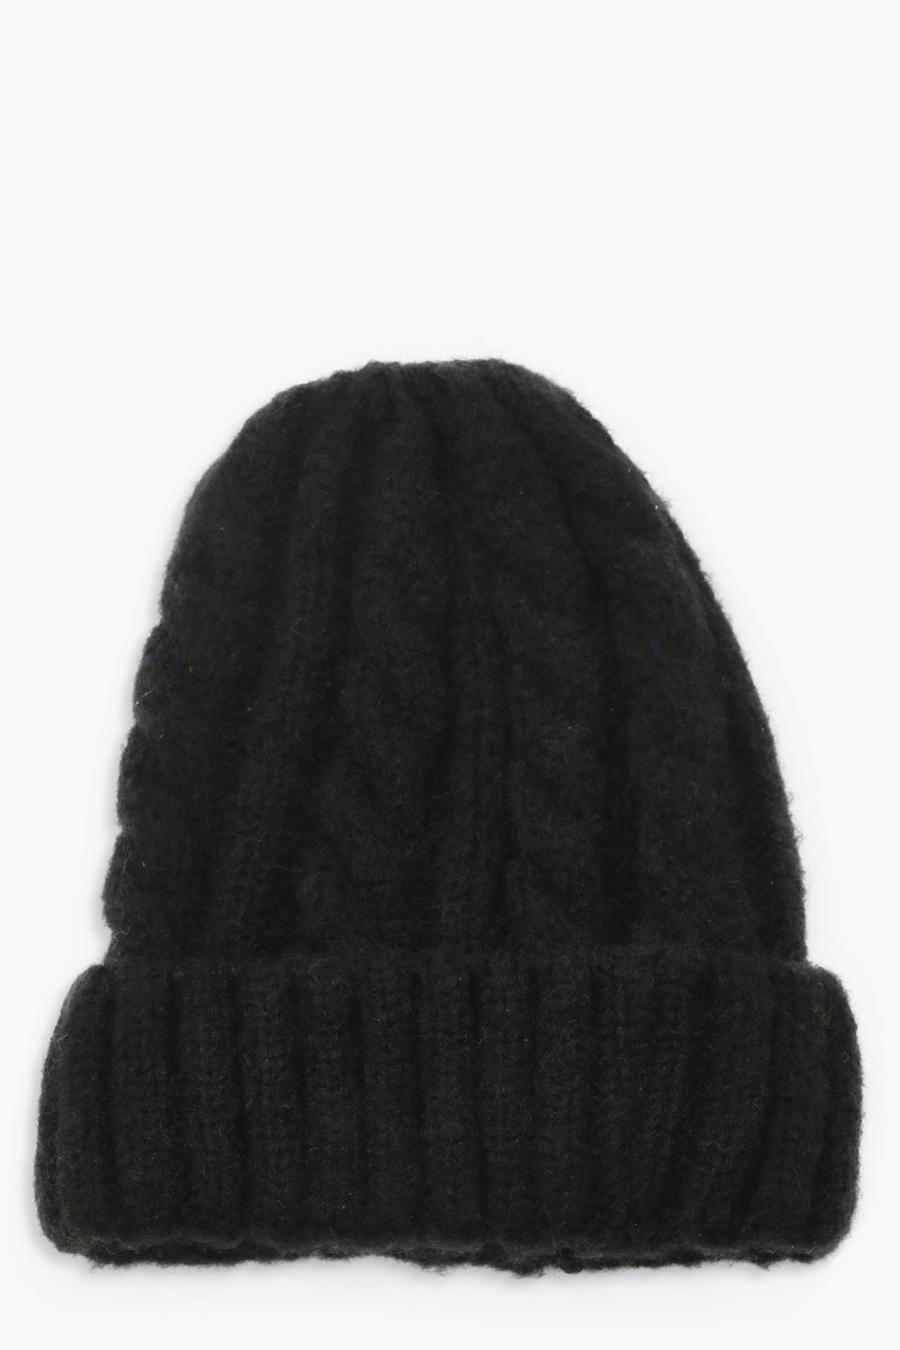 Black Chunky Mixed Marl Cable Knit Beanie